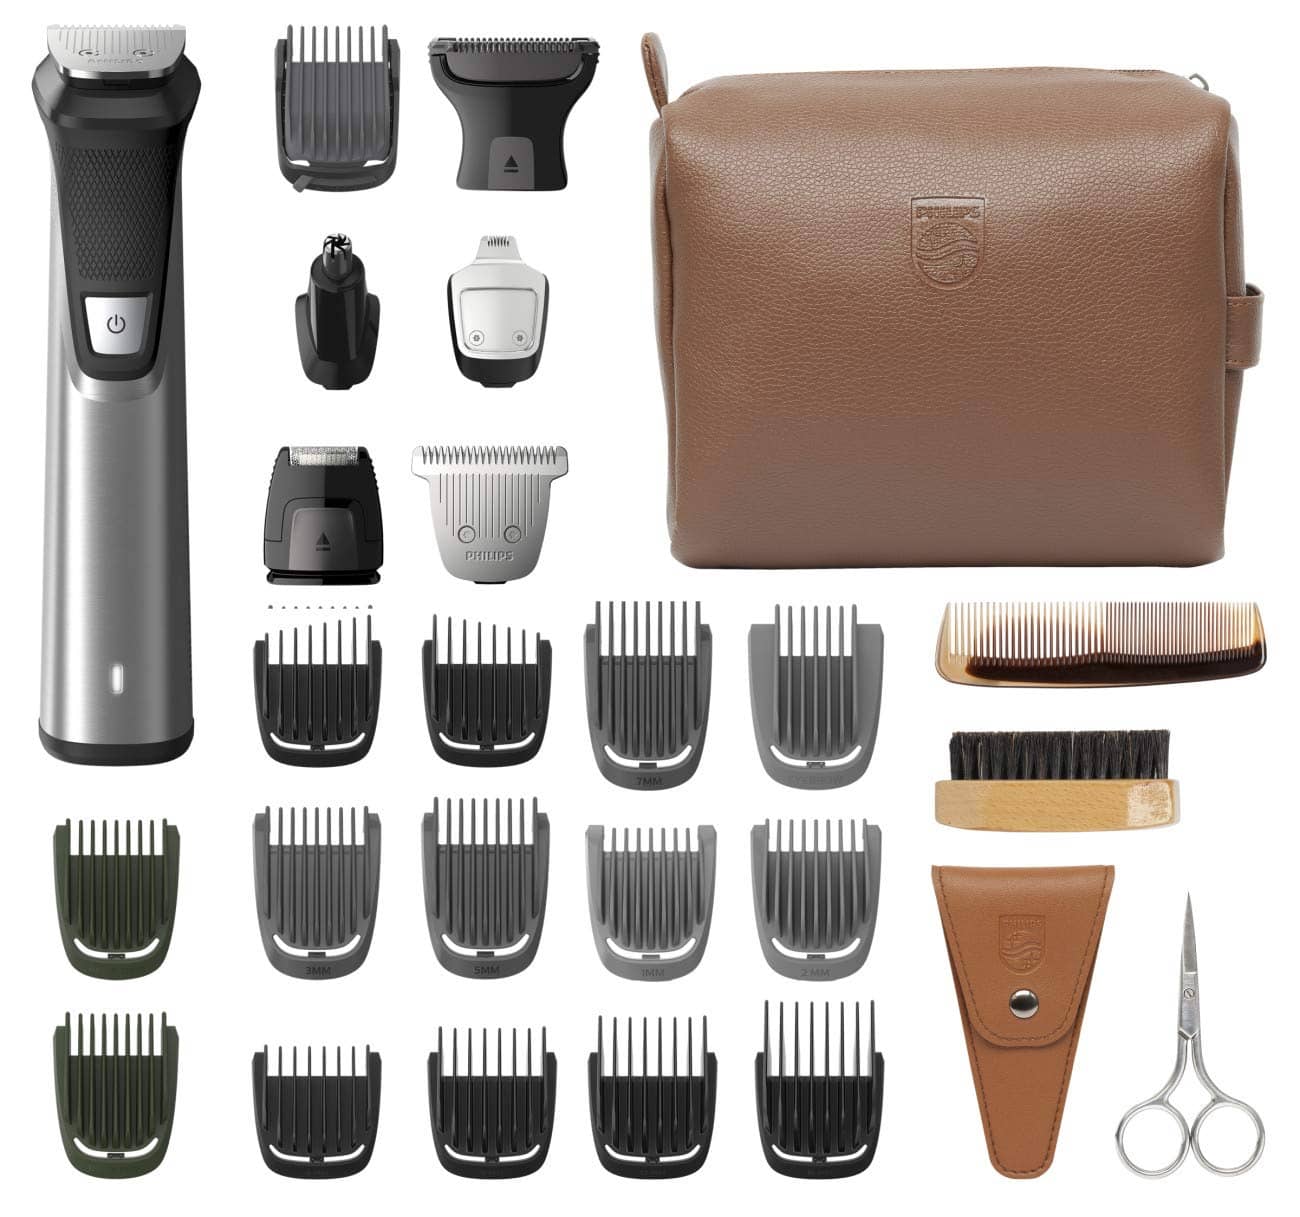 Philips Norelco Multi Groomer 29 Piece Mens Grooming Kit, Trimmer for Beard, Head, Body, and Face